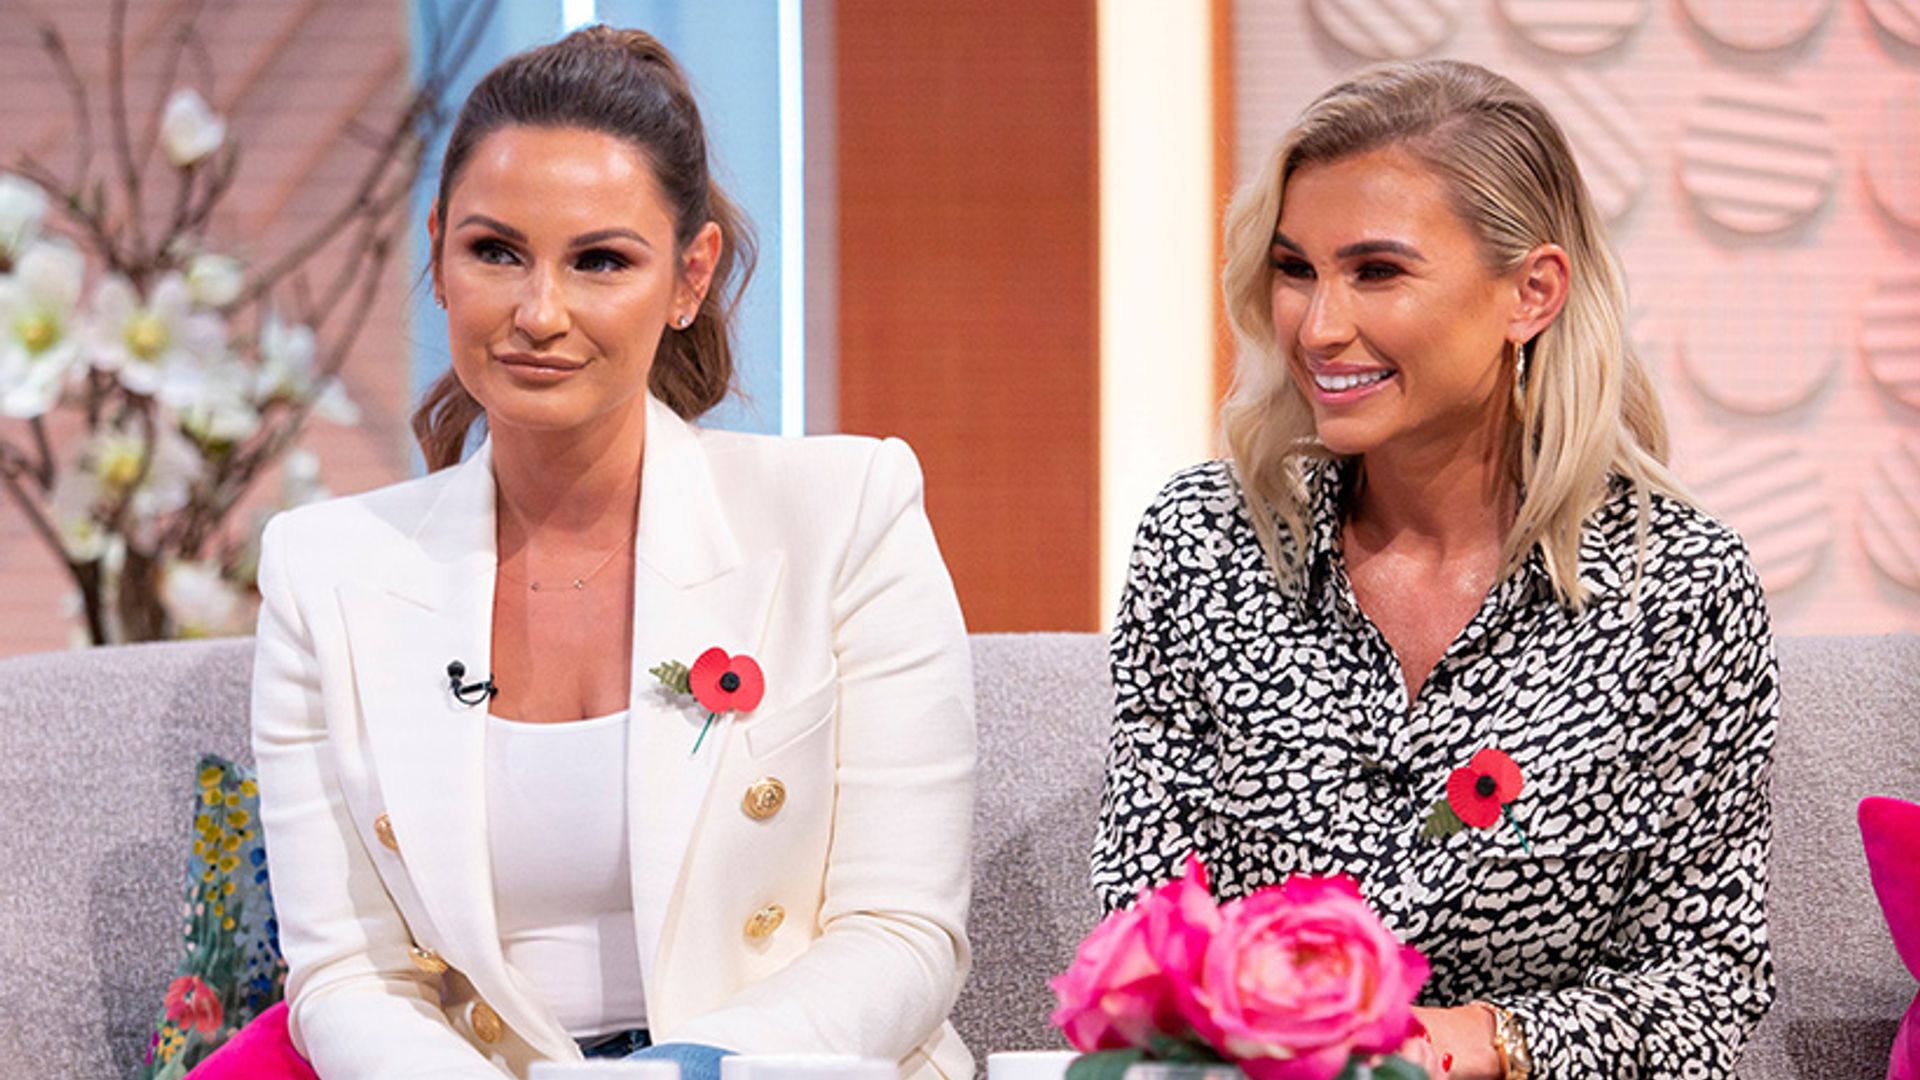 Billie and Sam Faiers dress to impress on Lorraine as they discuss motherhood